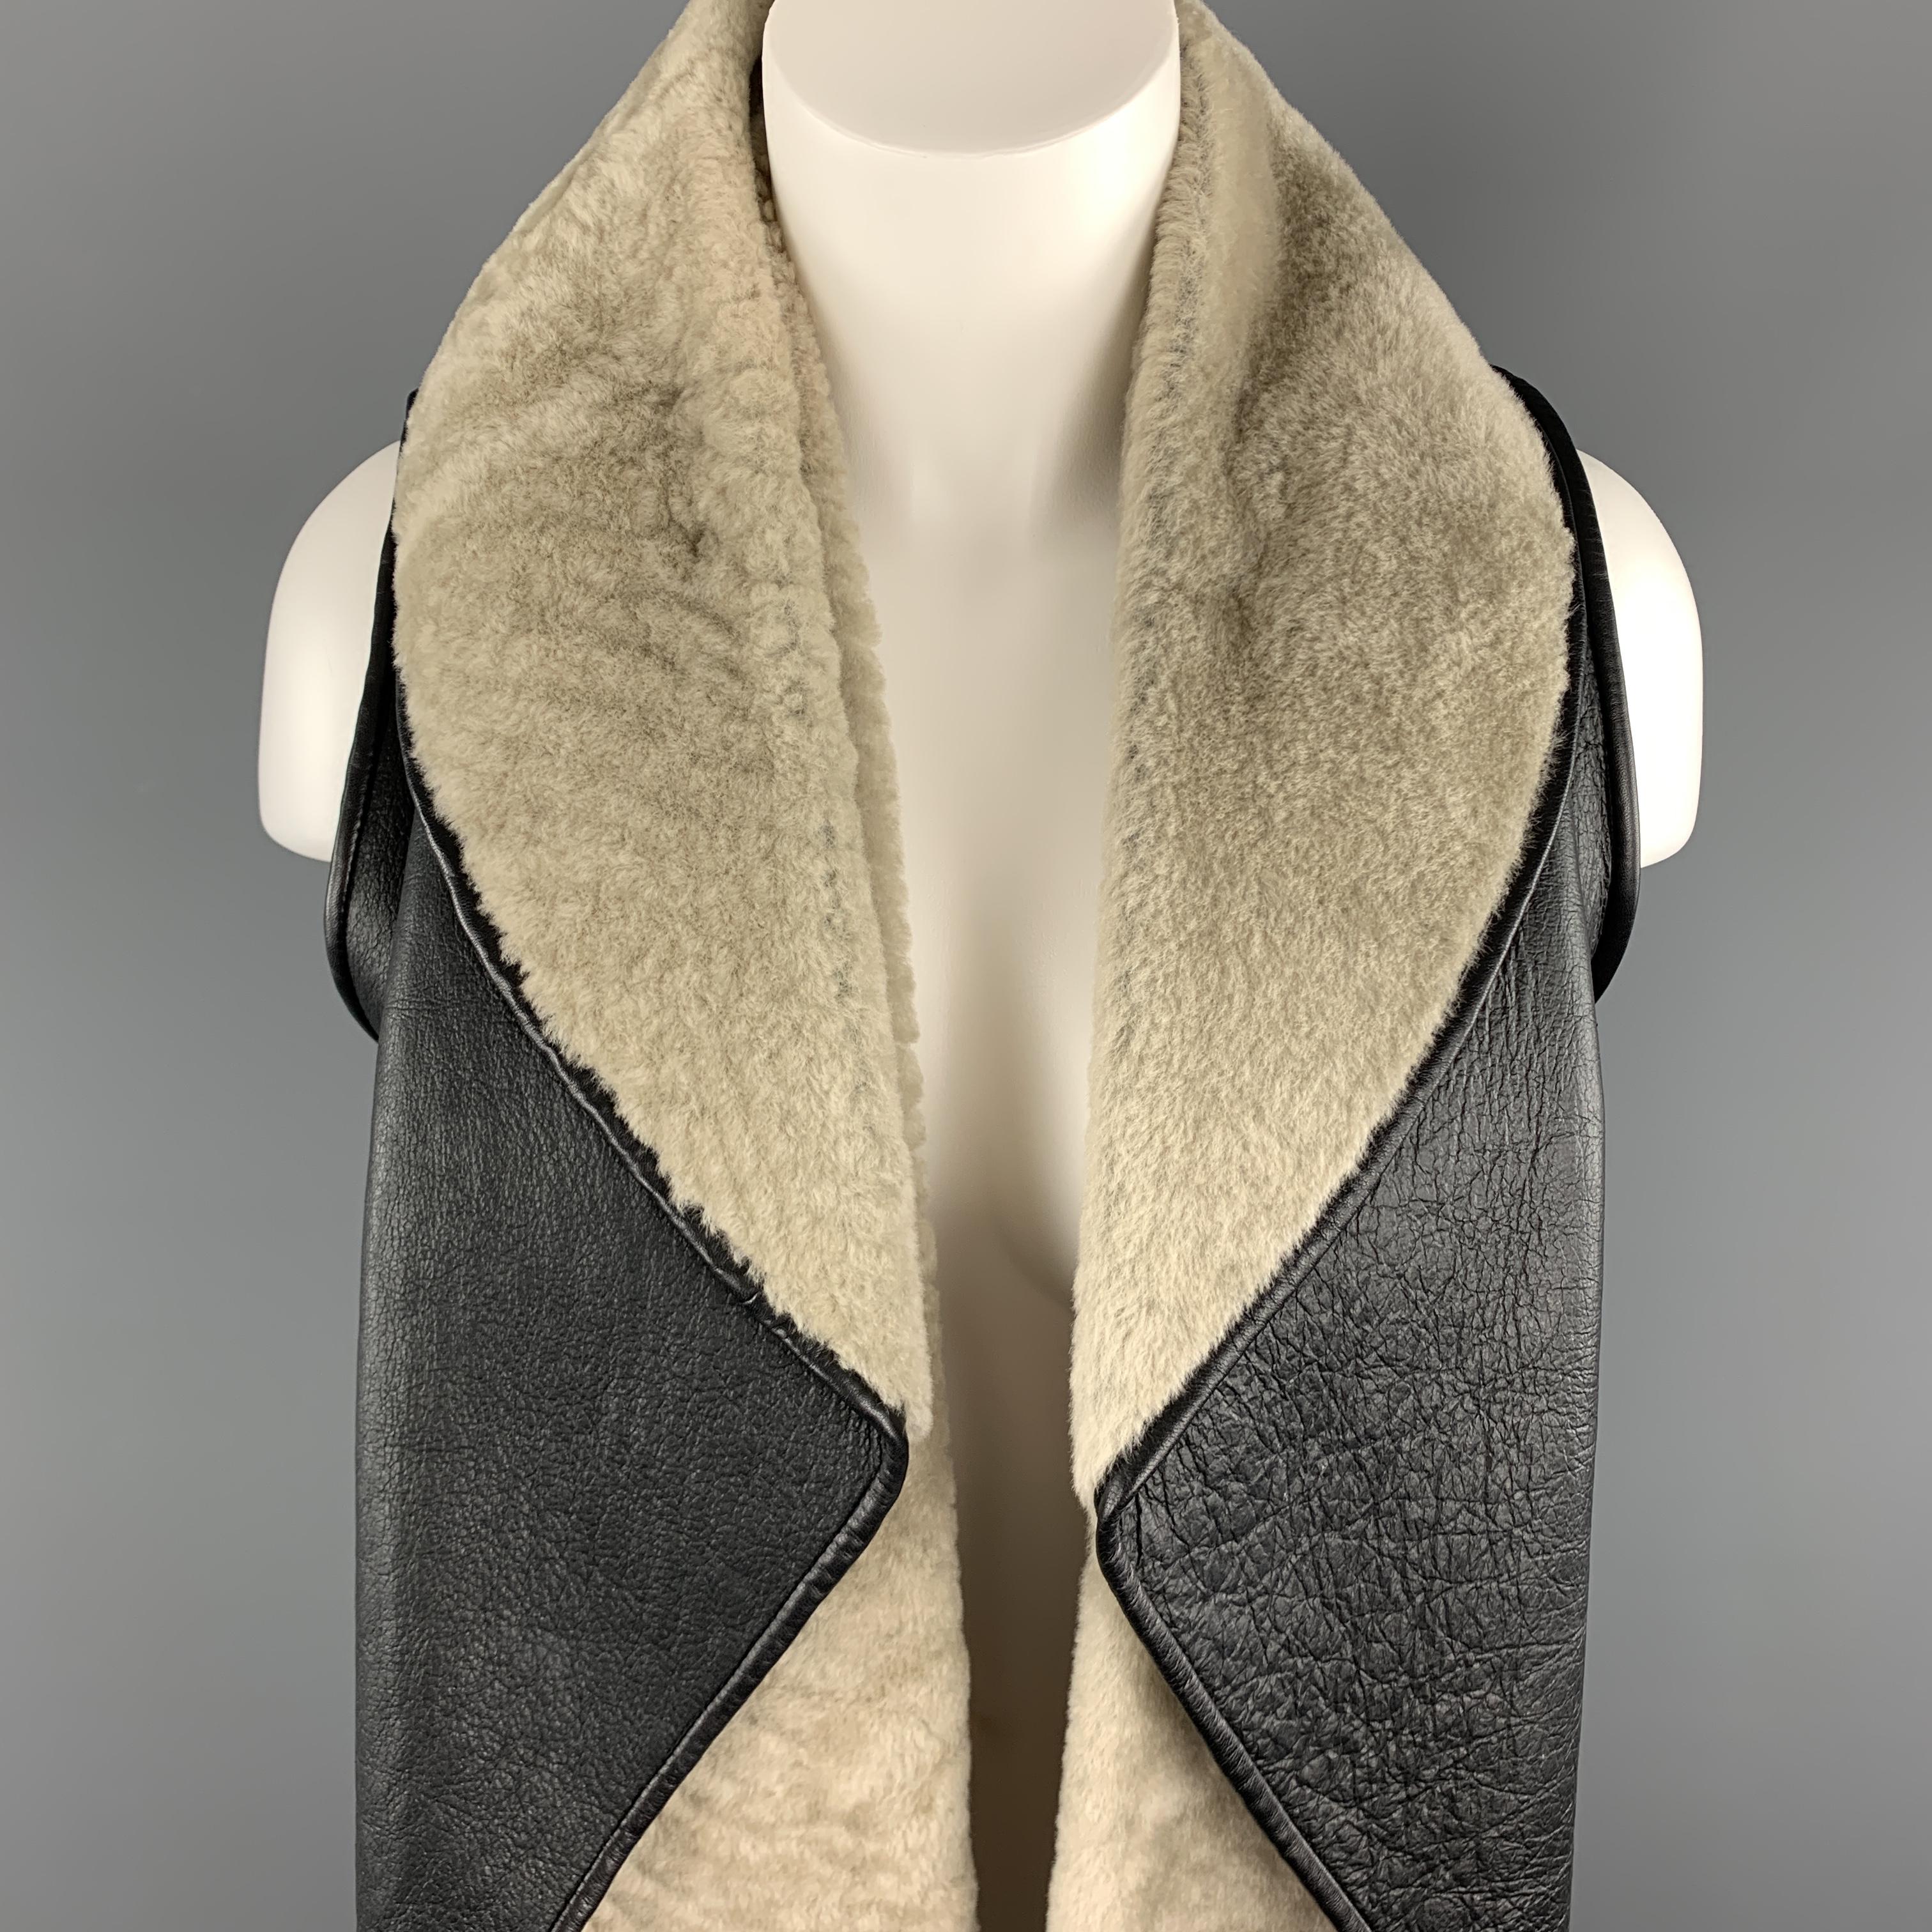 NELLIE PARTOW vest comes in black shearling with muted gray beige trimmed fur with a round folded draped lapel collar. Made in USA.

Excellent Pre-Owned Condition.
Marked:  XS

Measurements:

Shoulder: 13 in.
Bust: 34 in.
Length: 23-28 in.